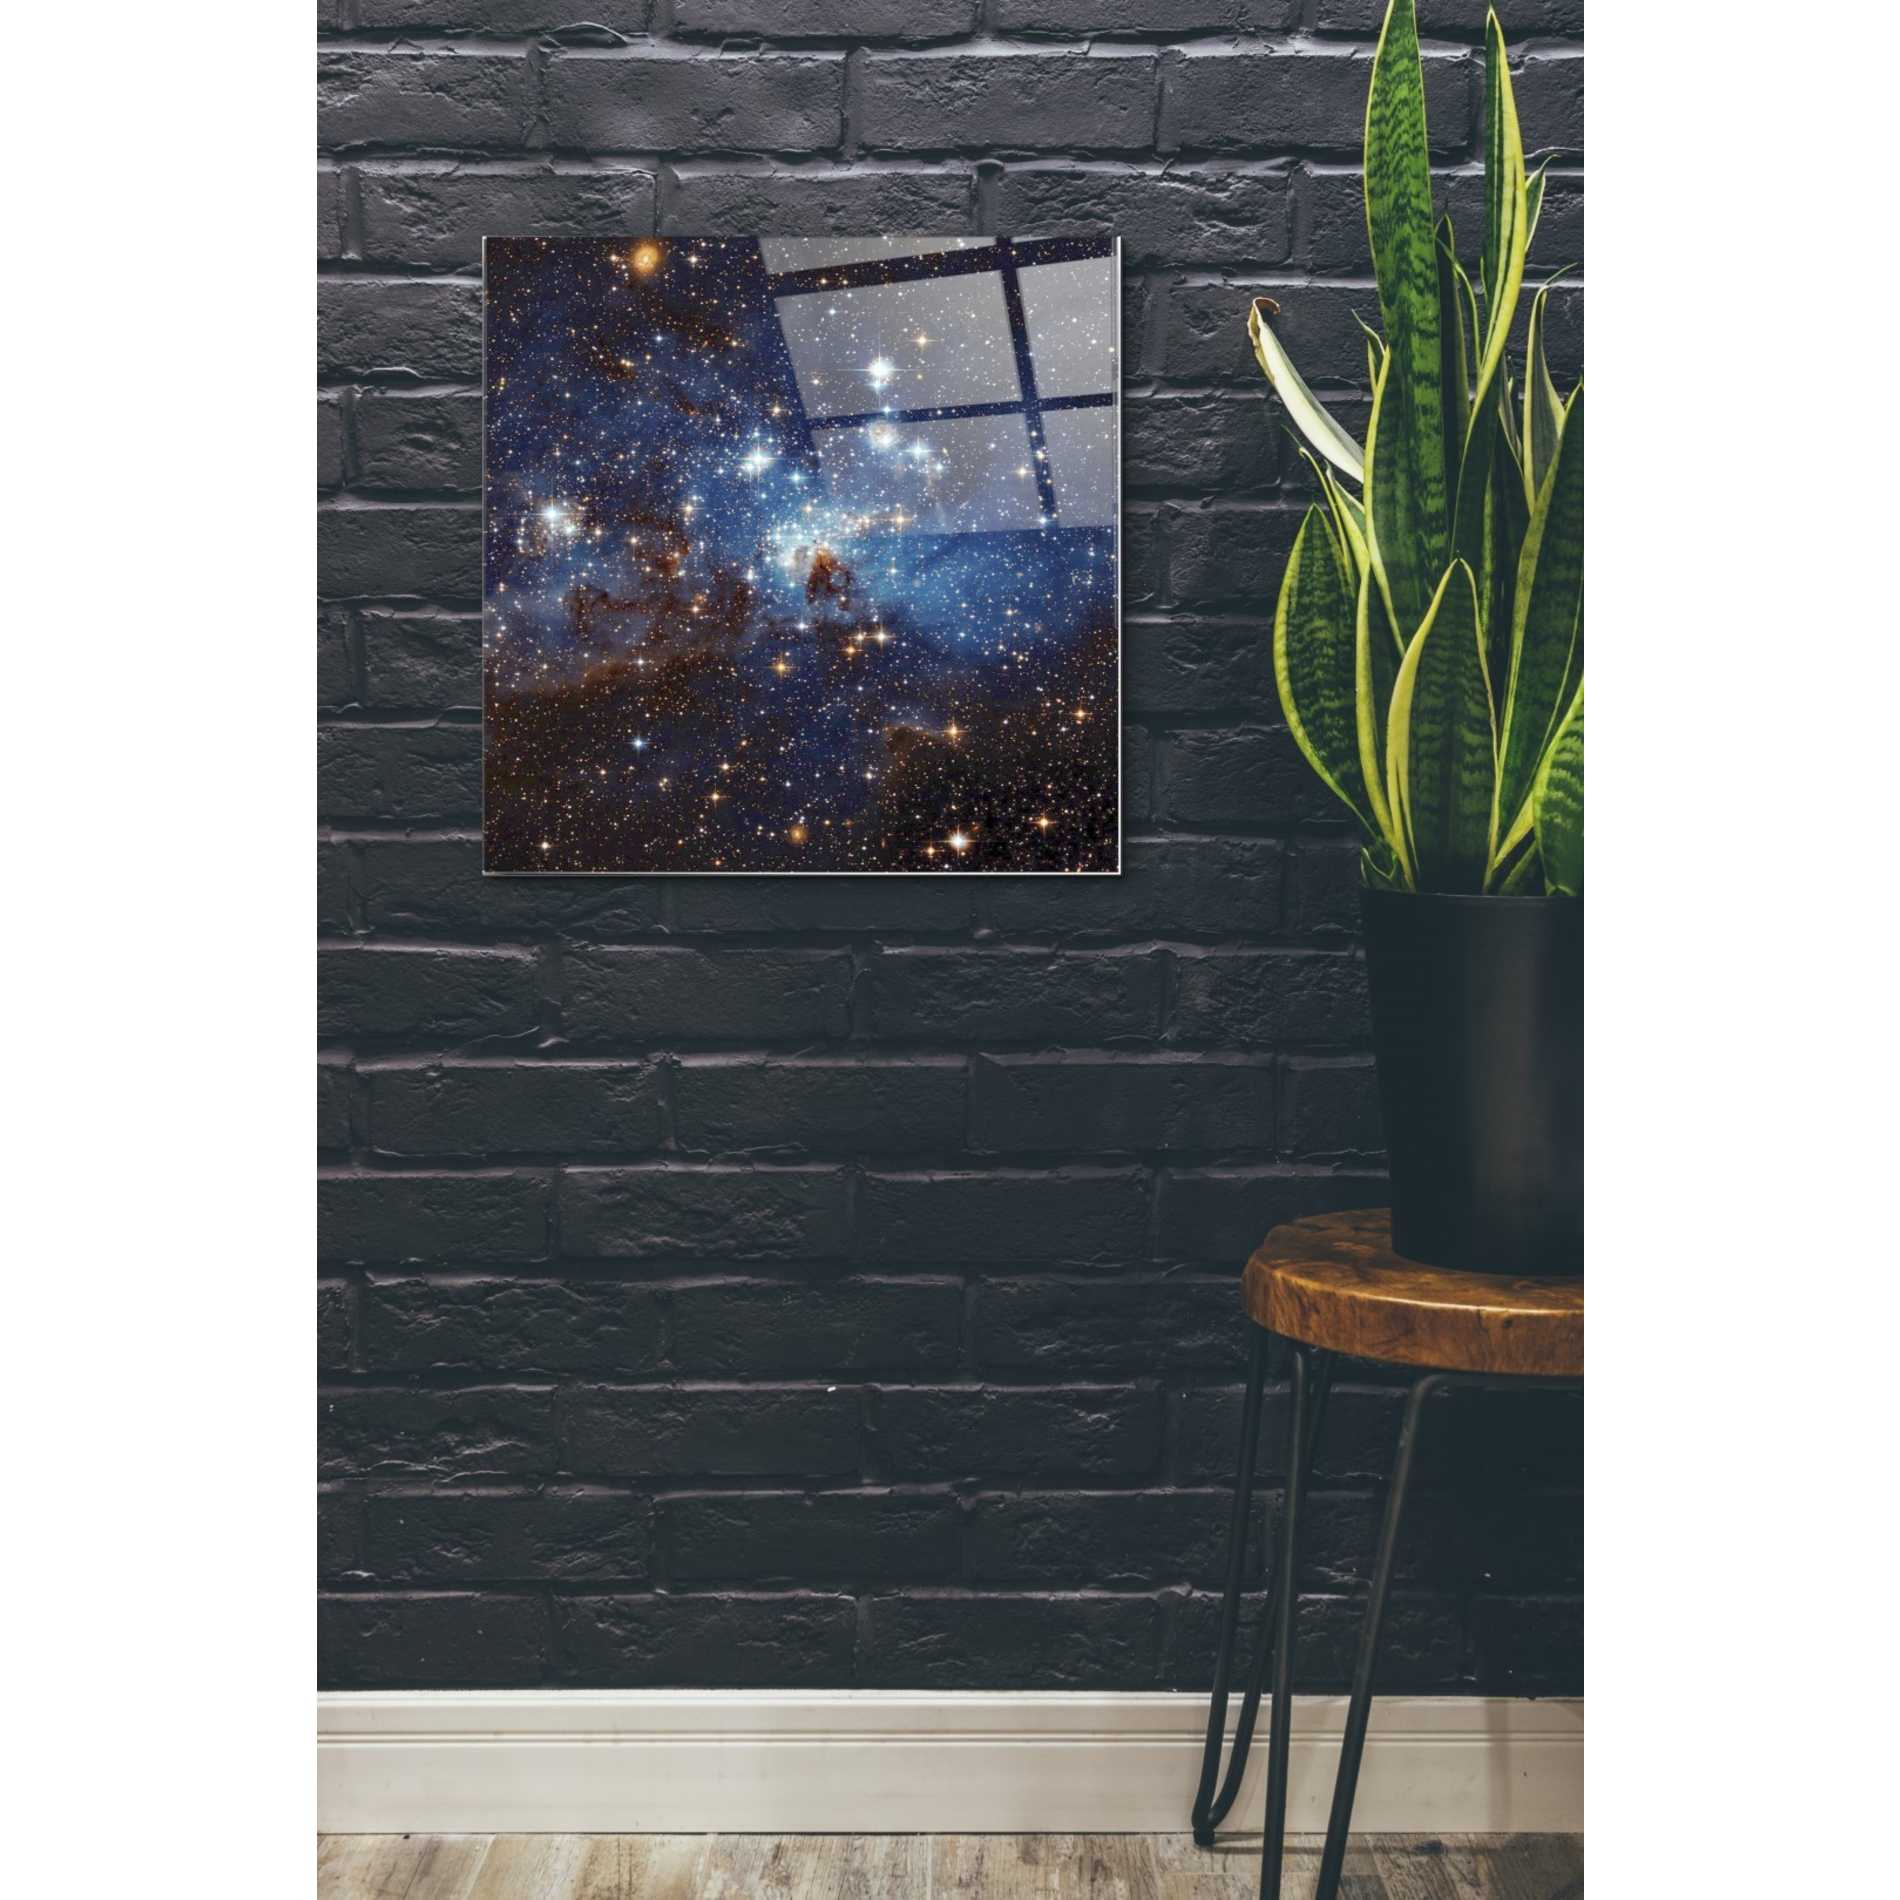 Epic Art "LH 95 Star Cluster" Hubble Space Telescope Acrylic Glass Wall Art,24x24